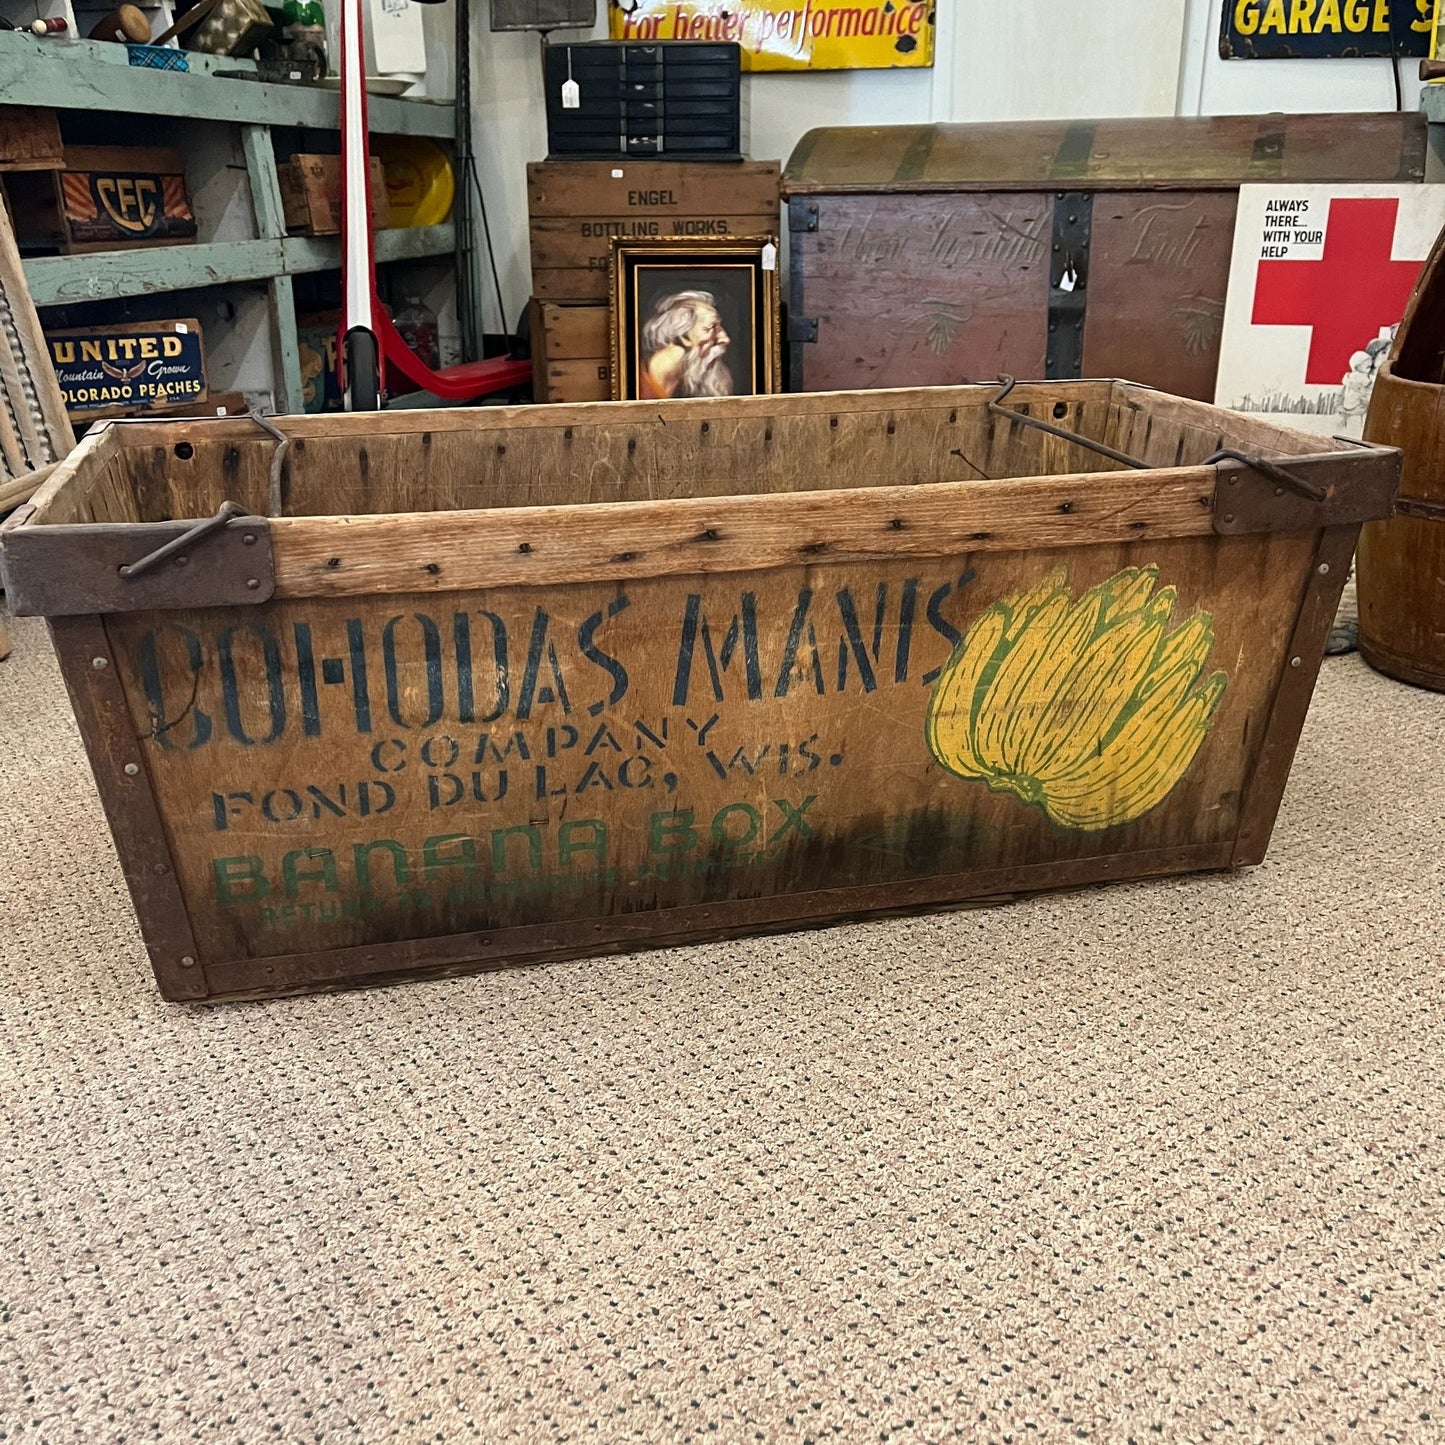 Vintage Banana Crate Cohodas Manis Co Fond du lac Wis Advertising Wooden Box